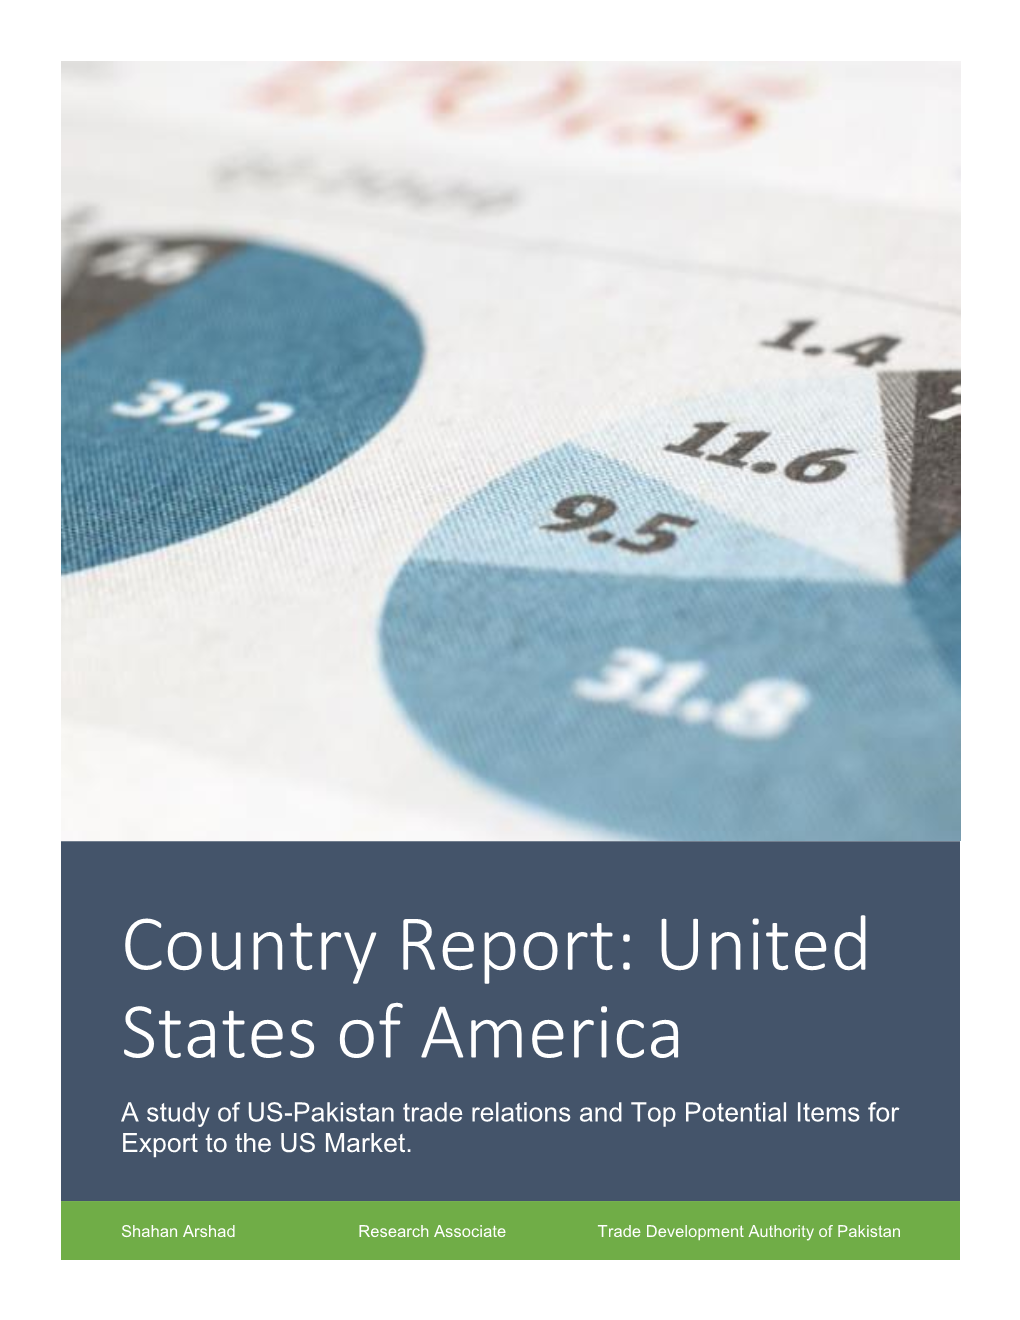 Country Report: United States of America a Study of US-Pakistan Trade Relations and Top Potential Items for Export to the US Market